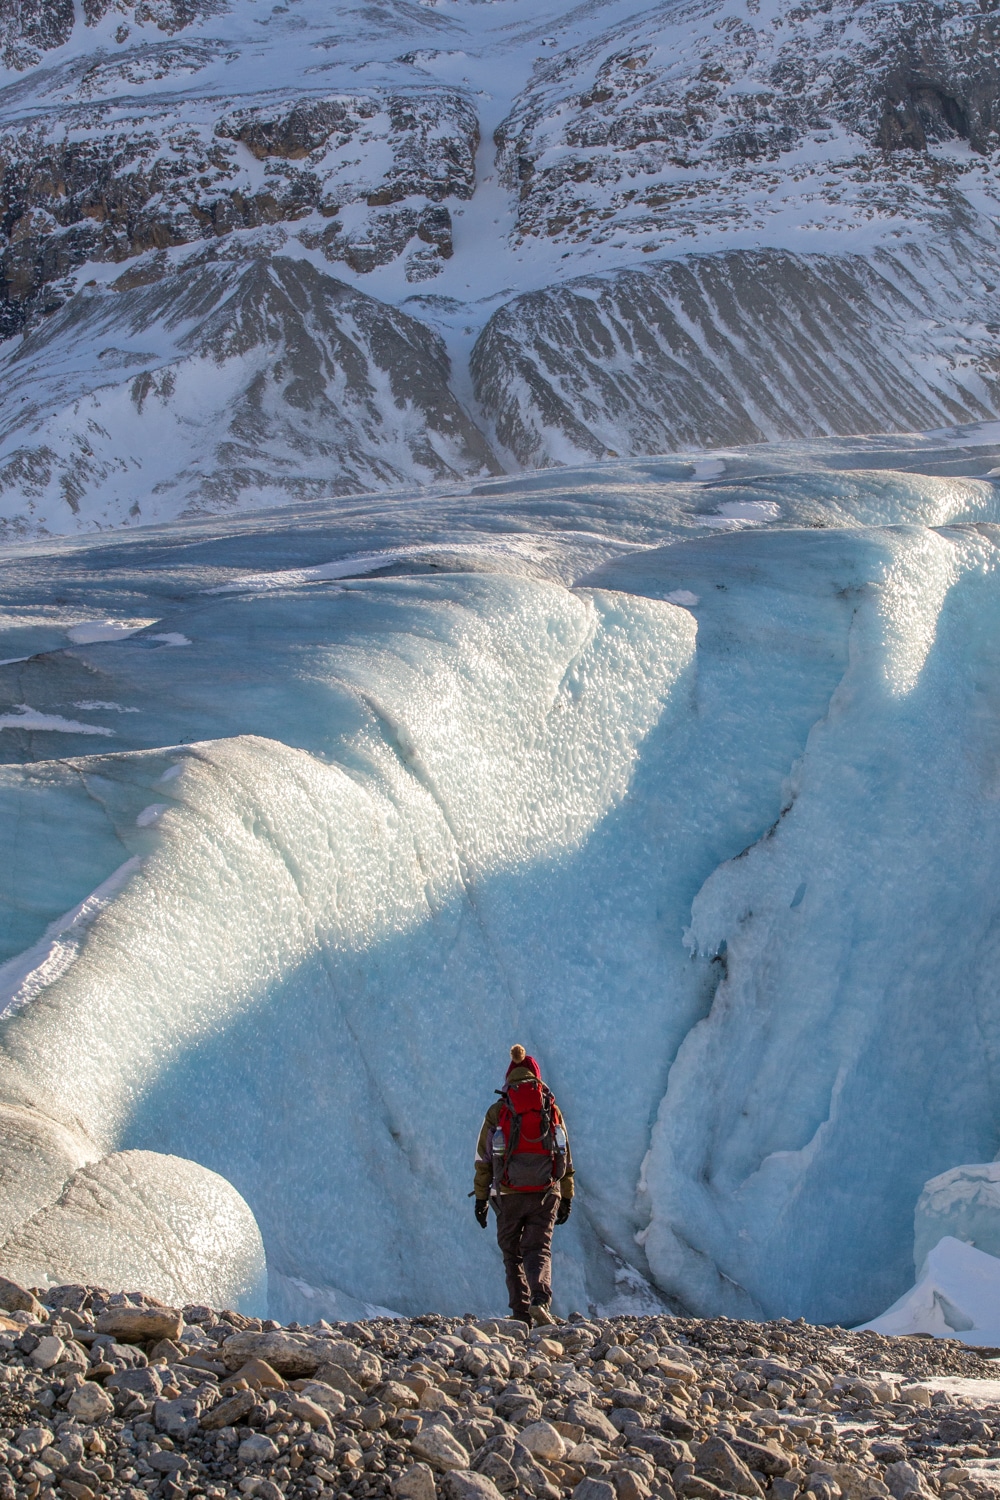 Man Exploring Icy Landscape in the Canadian Rockies